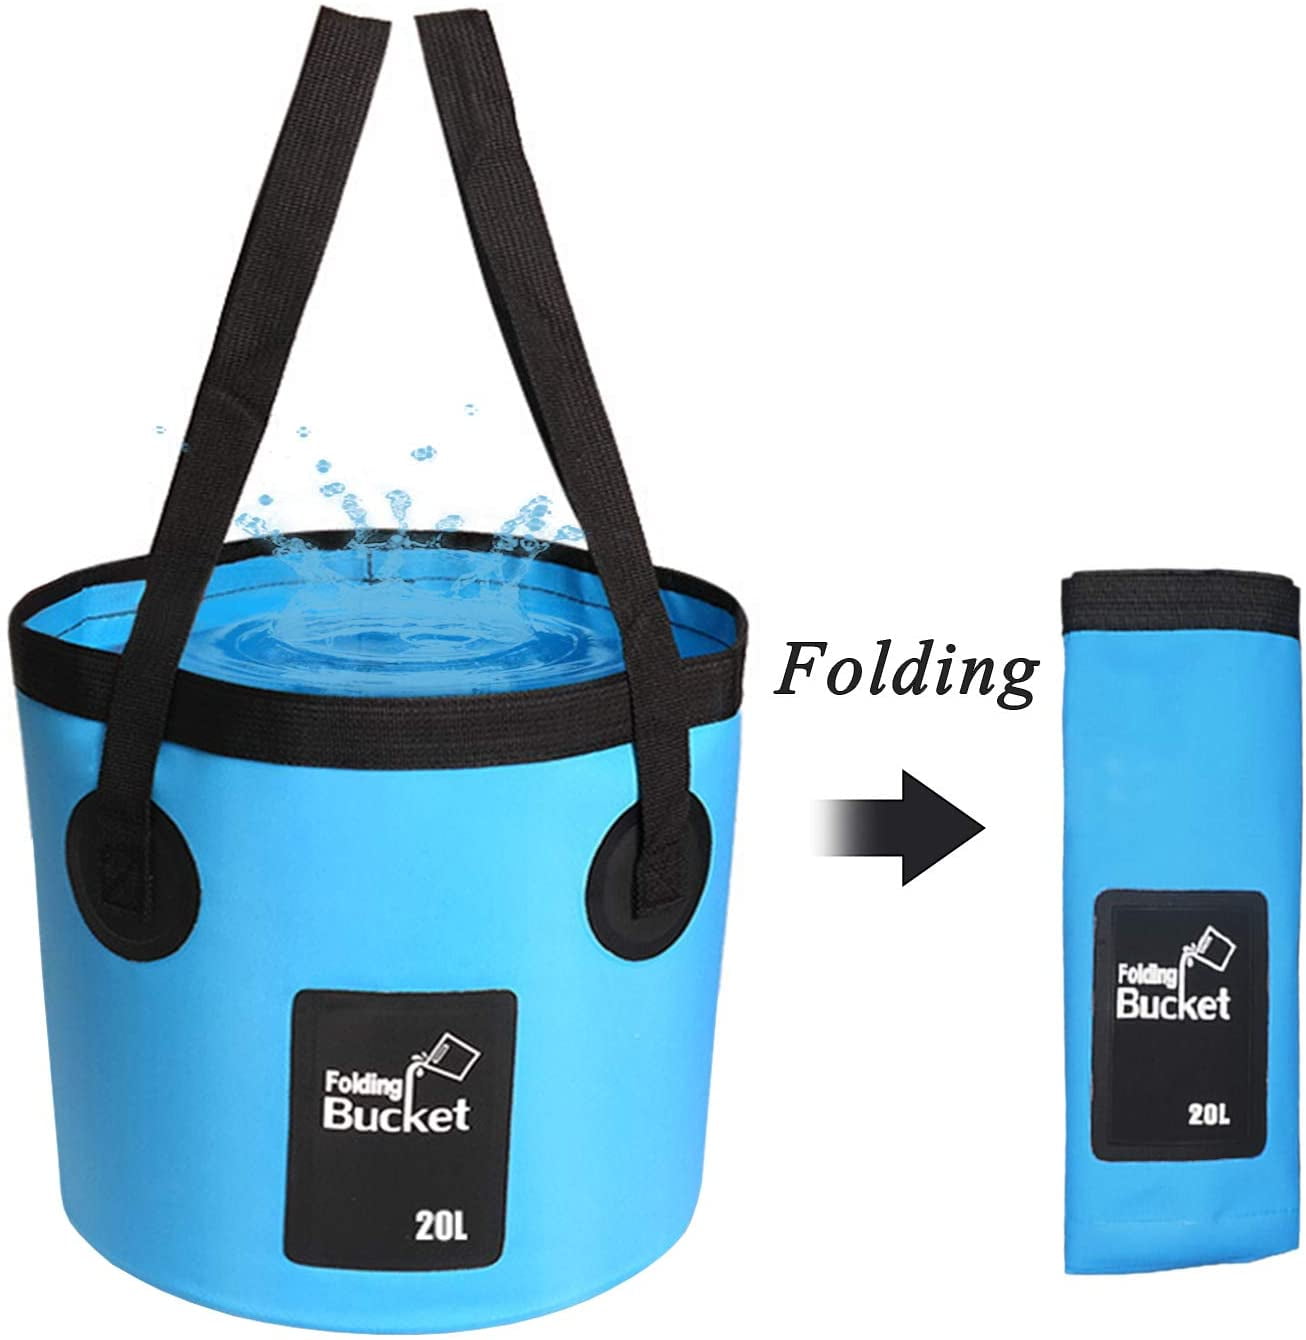 Tool Portable Fishing Buckets Water Storage Bag Folding Bucket Carrier Bags 